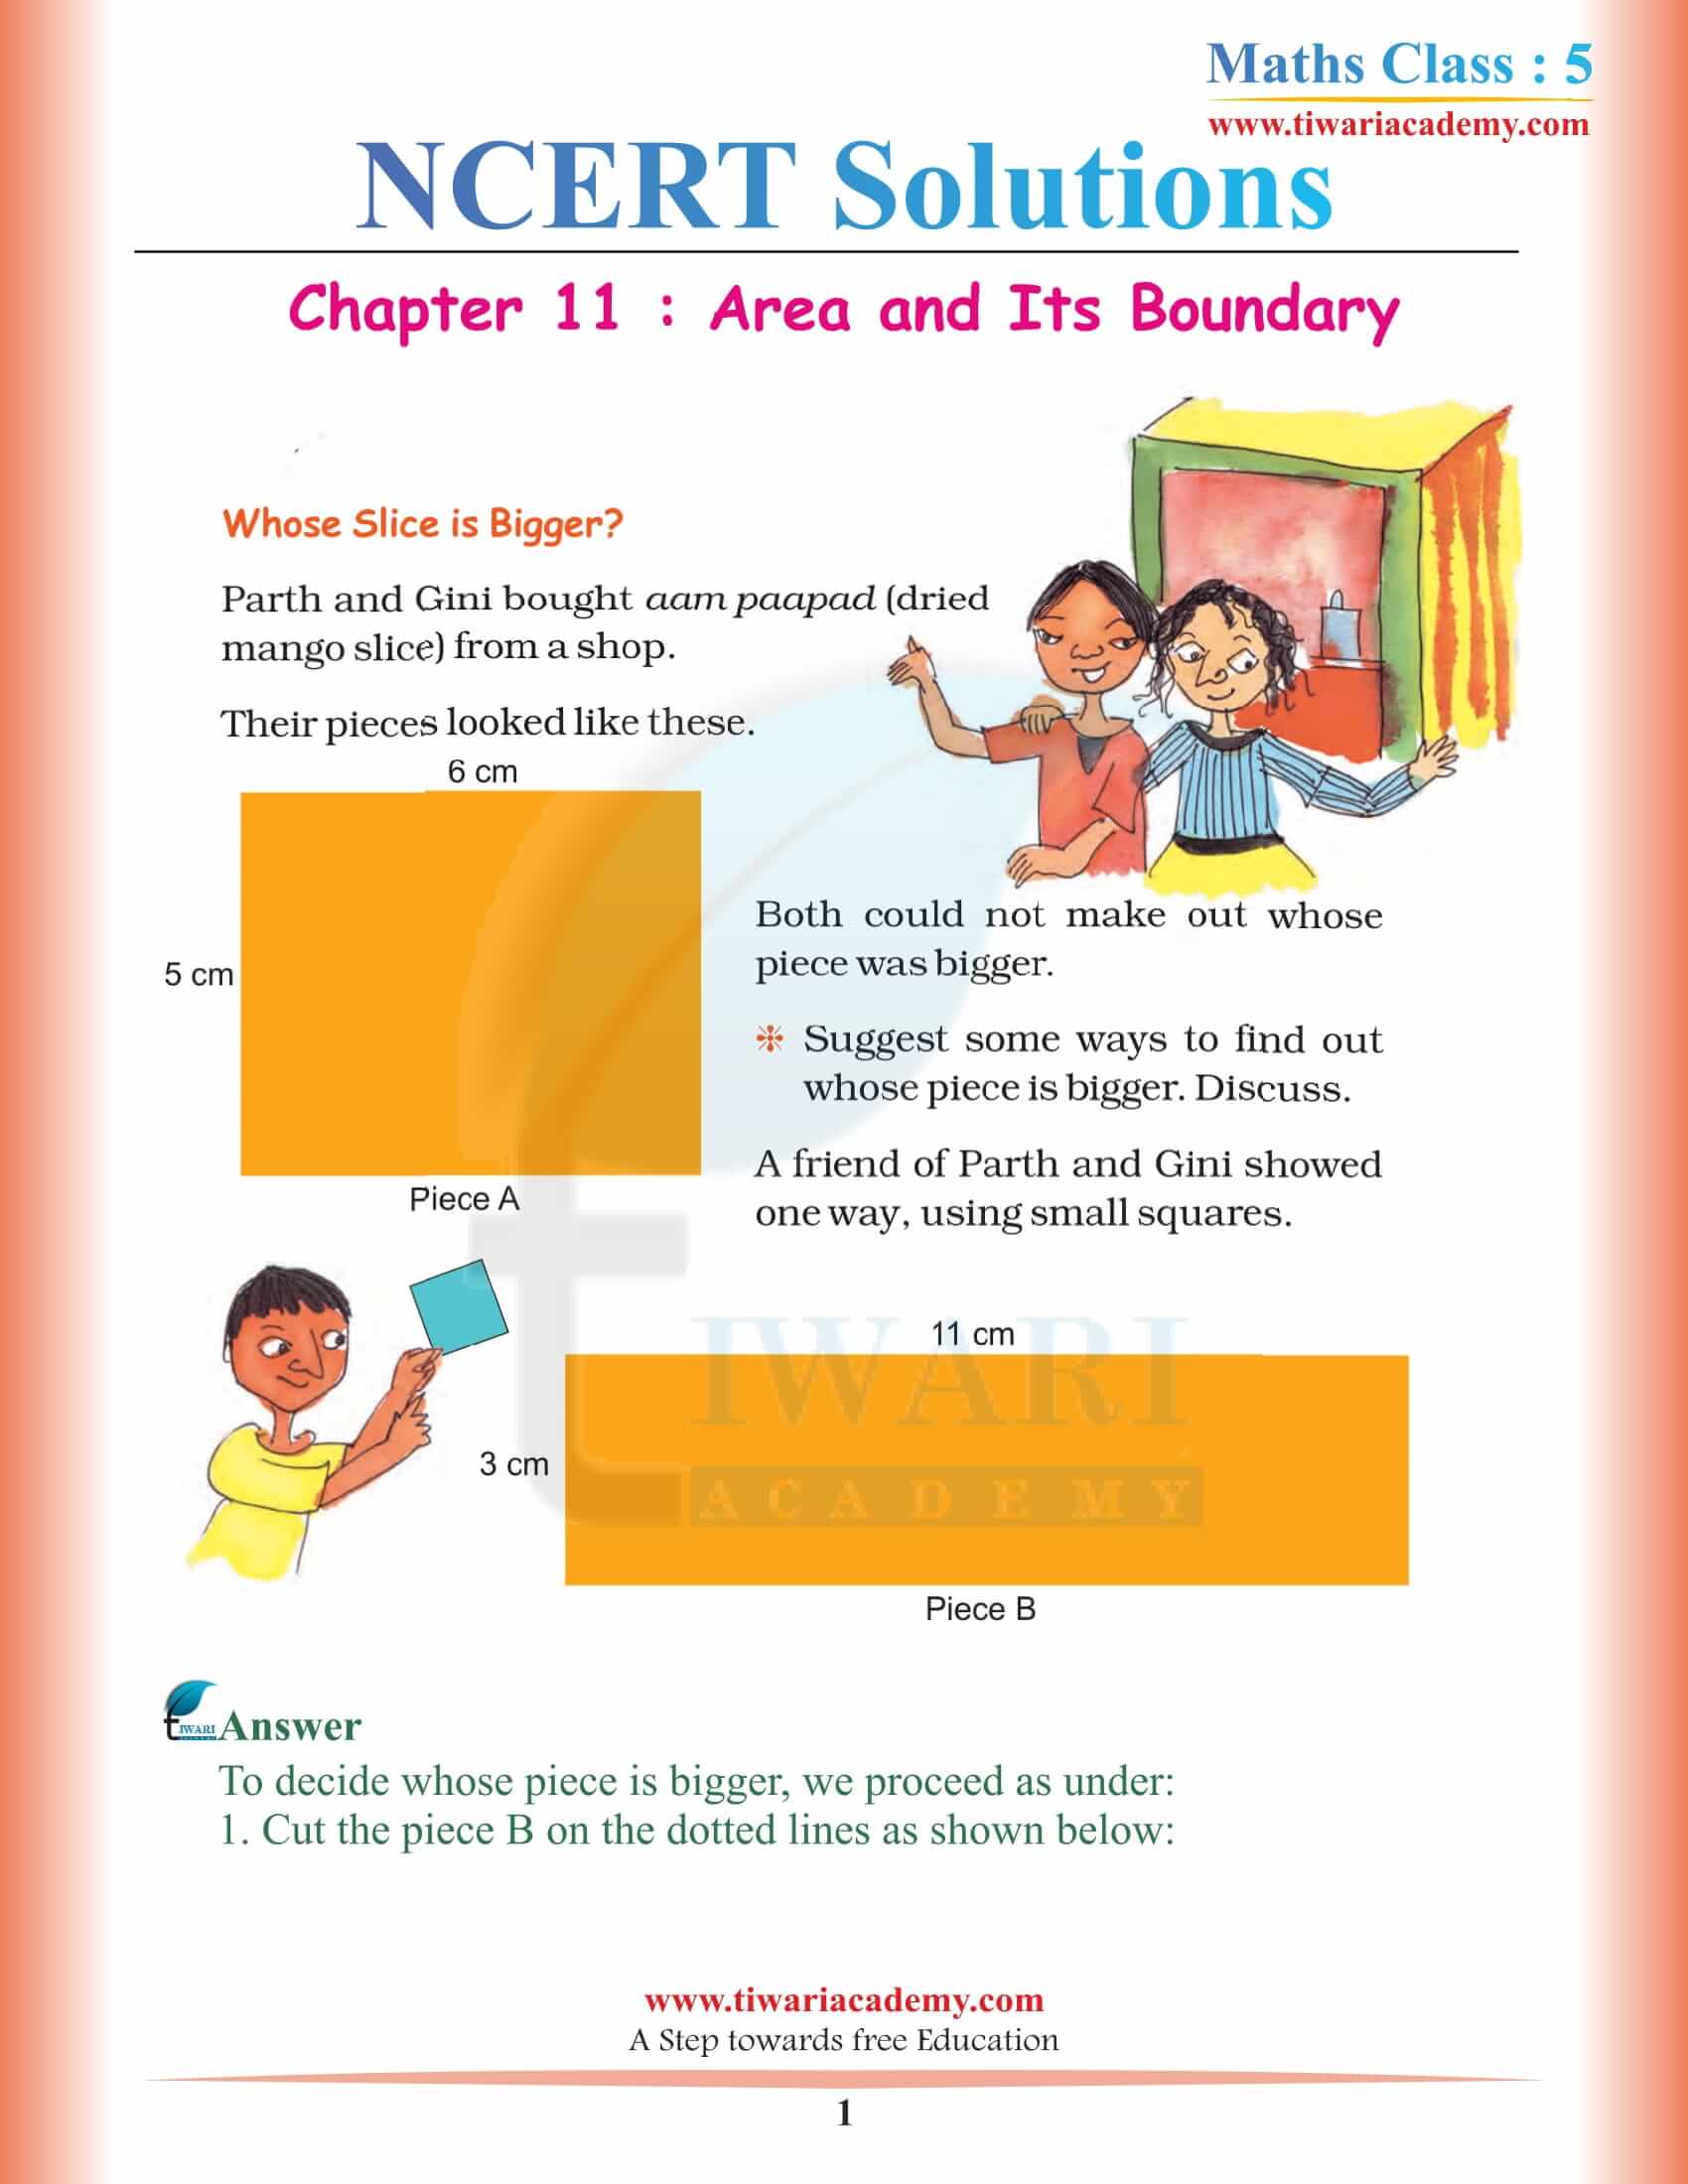 NCERT Solutions for Class 5 Maths Chapter 11 Area and its Boundary